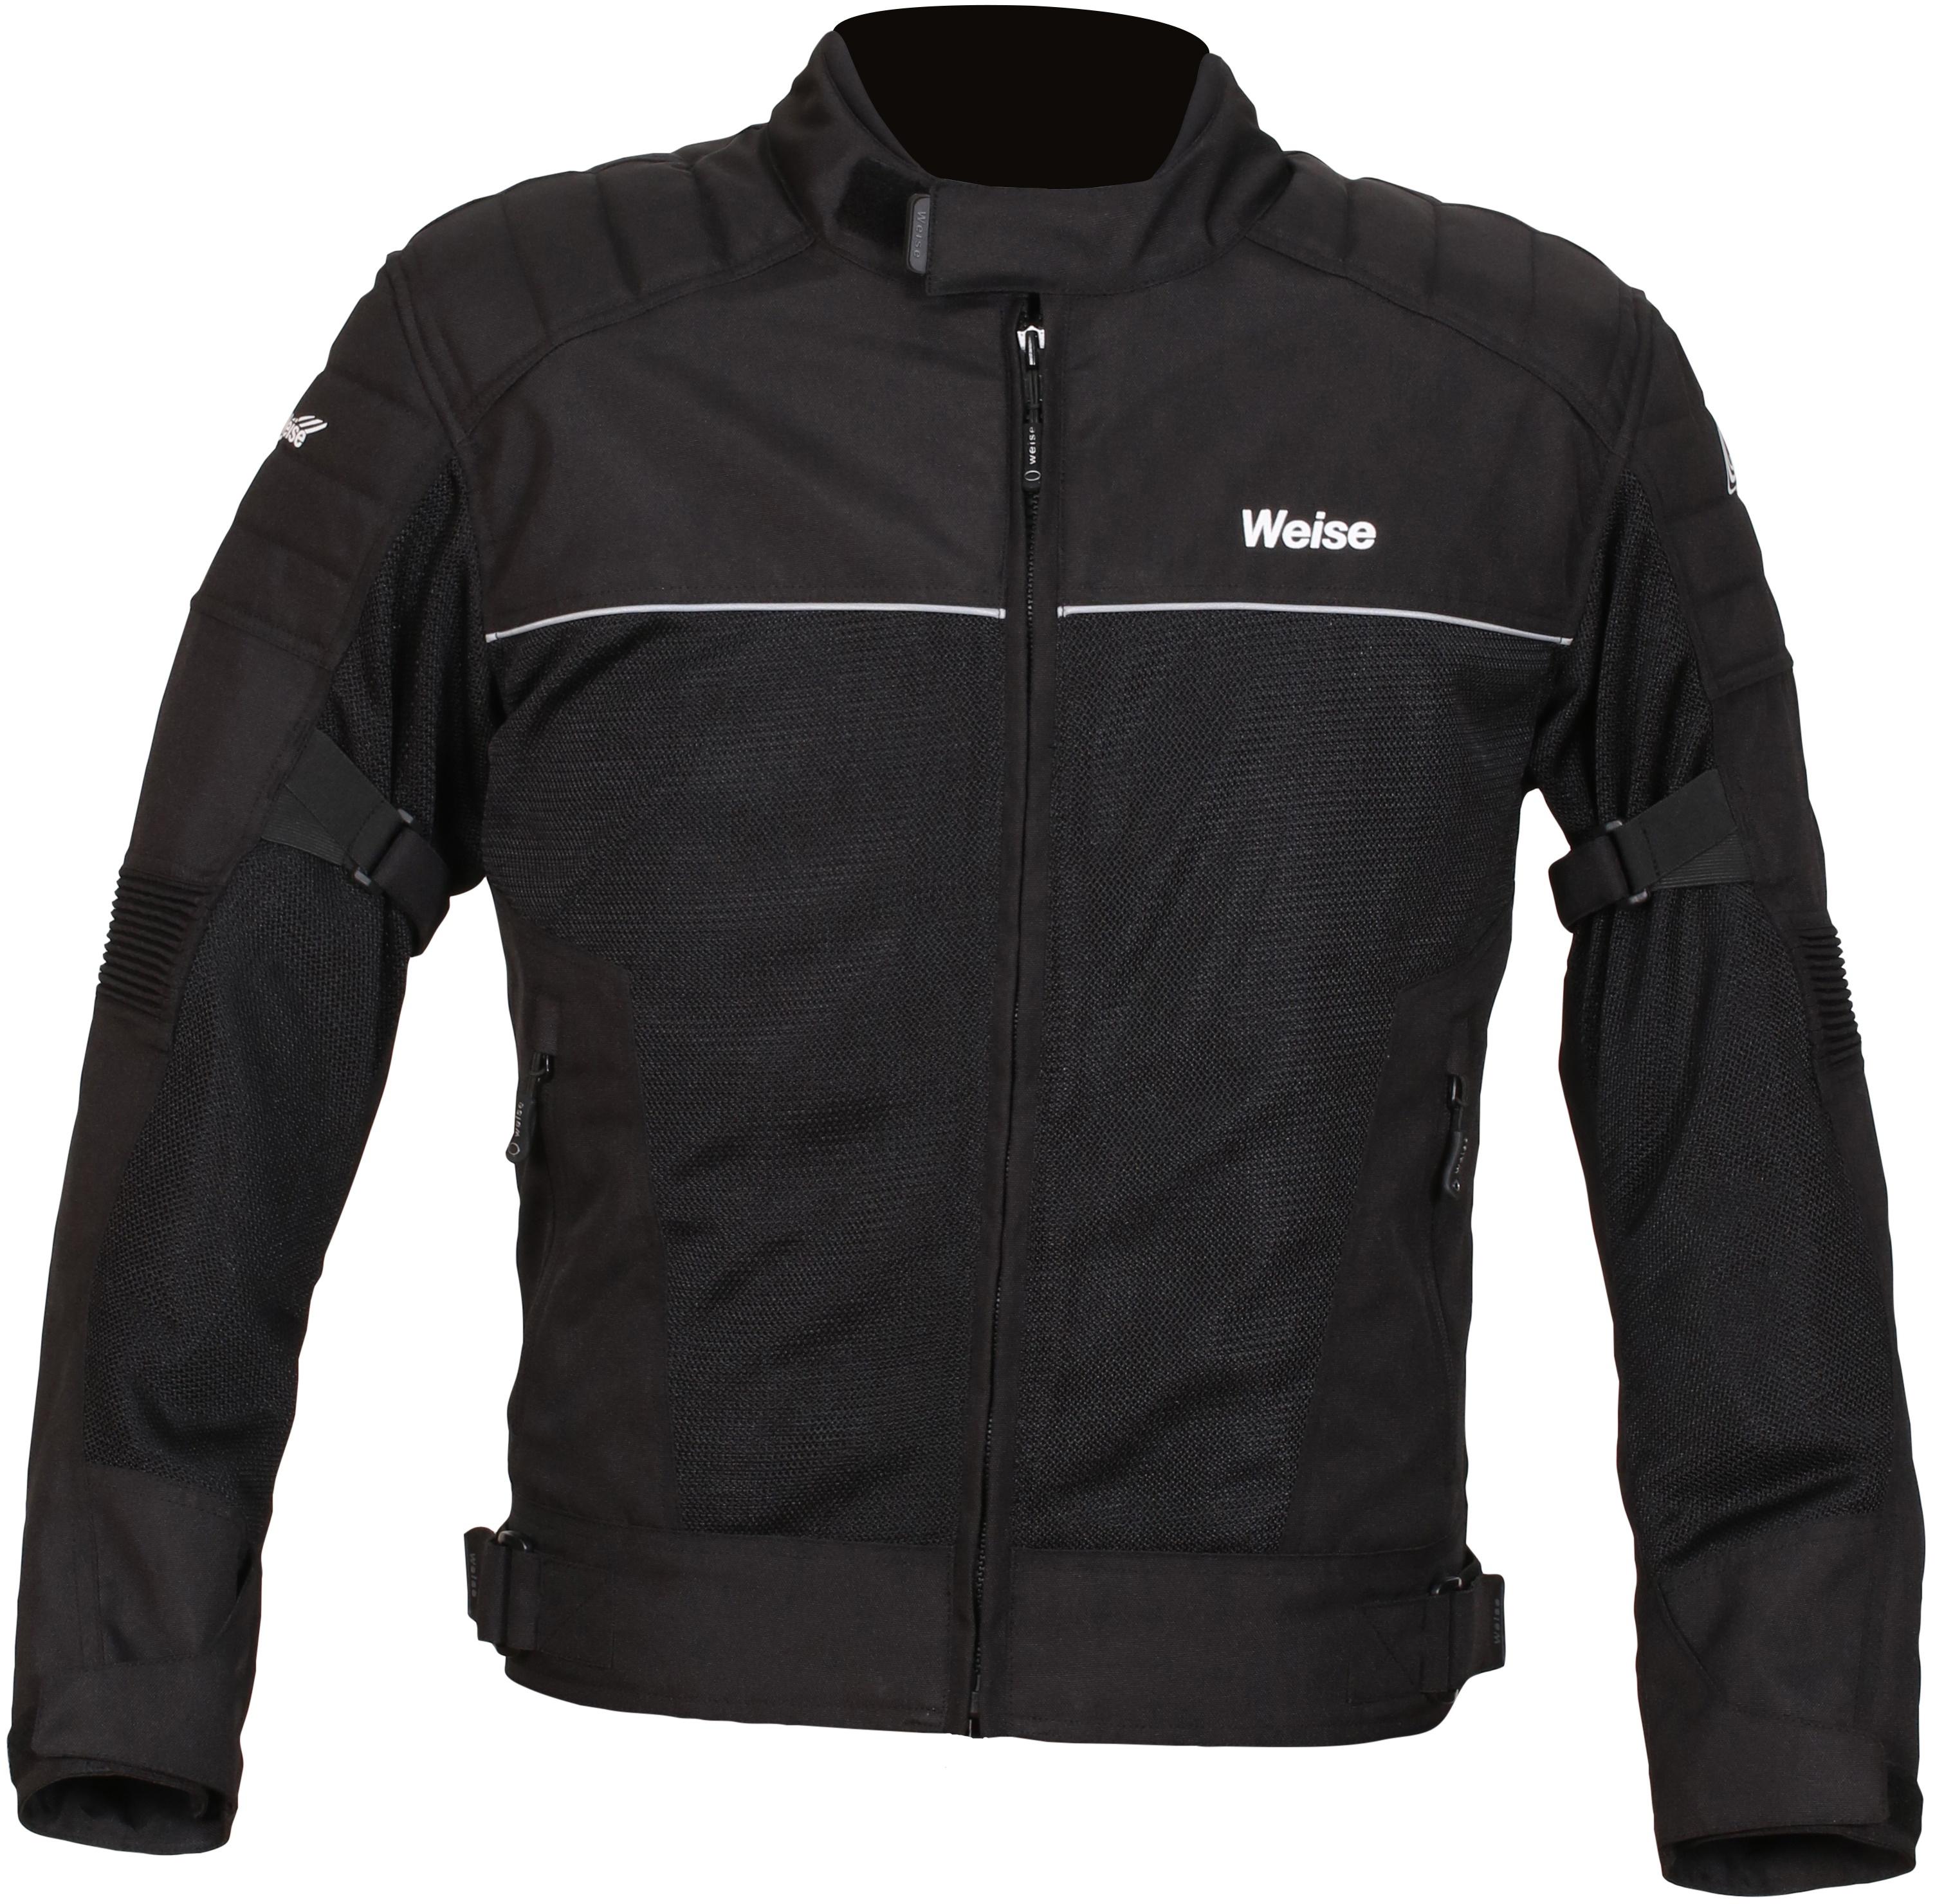 Weise Scout Motorcycle Jacket - Black, 3Xl